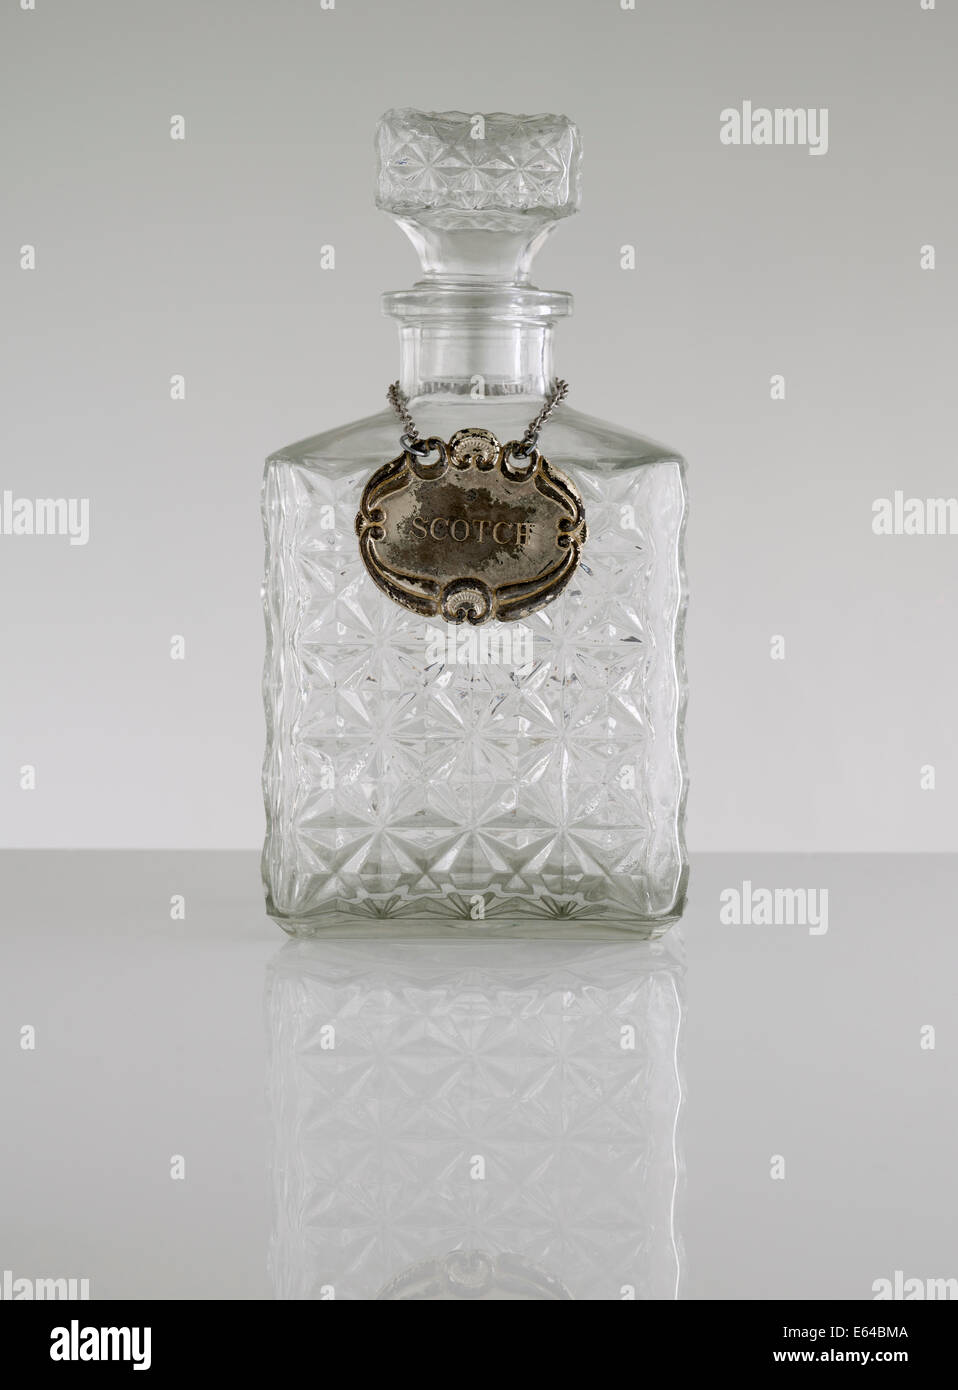 Vintage Carafe Bottle with Scotch Whisky Tag Label Stock Photo